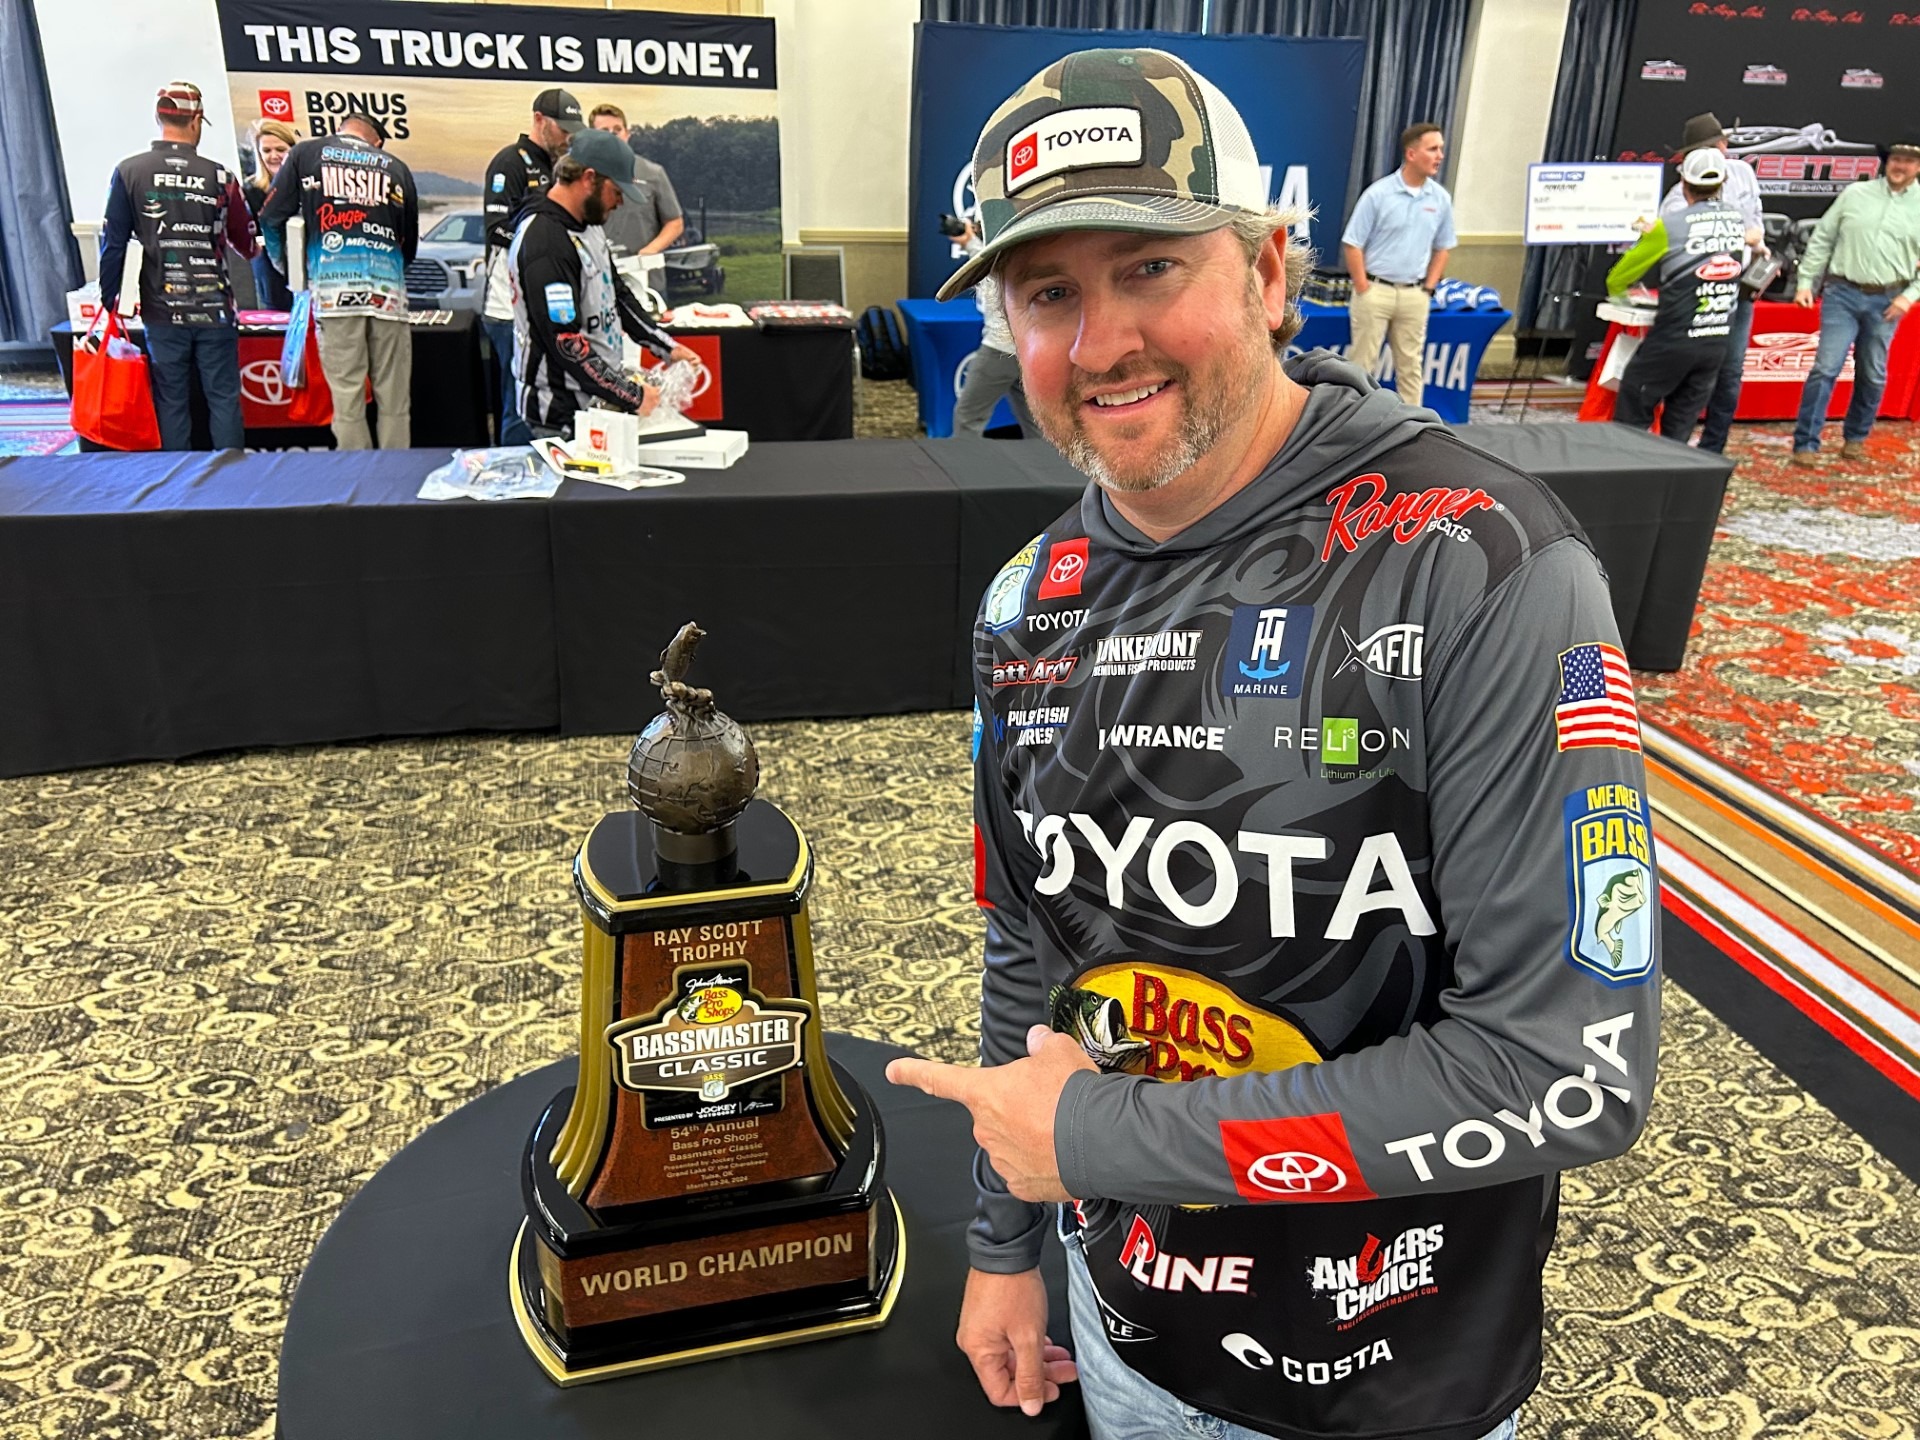 Arey's only missing one trophy - Bassmaster